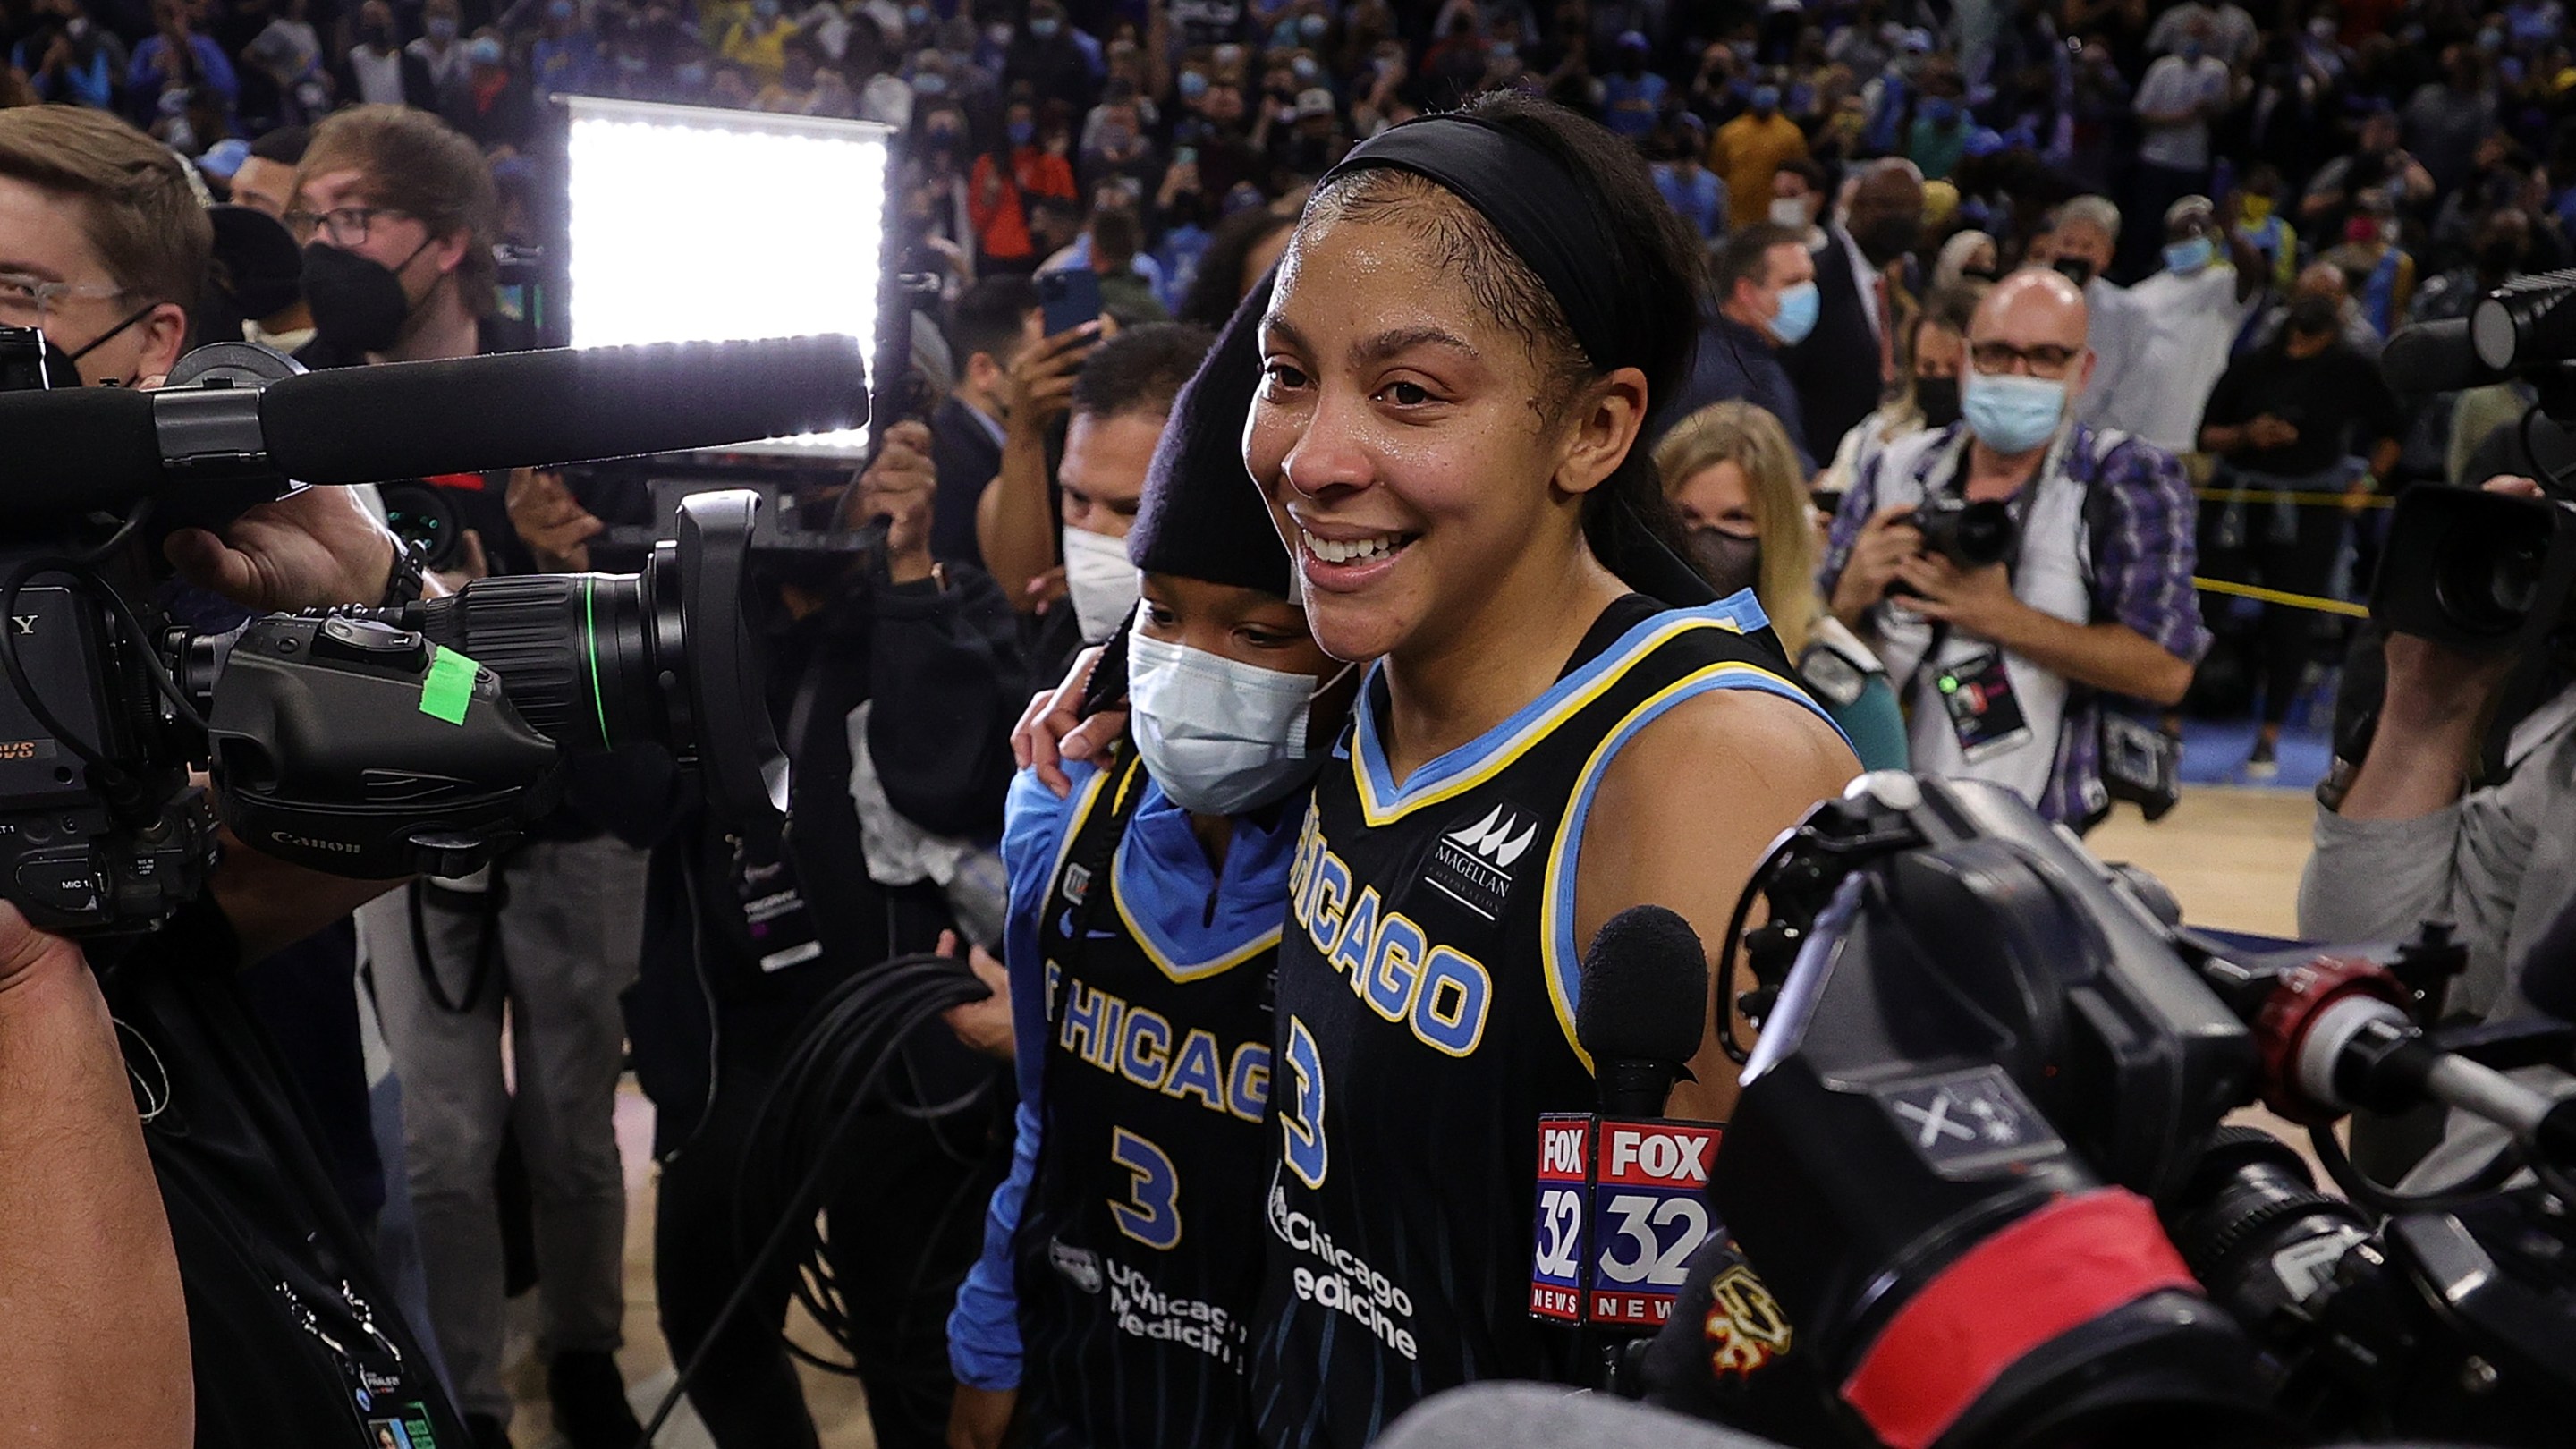 Candace Parker #3 of the Chicago Sky celebrates after defeating the Phoenix Mercury 80-74 in Game Four of the WNBA Finals to win the championship at Wintrust Arena on October 17, 2021 in Chicago, Illinois.